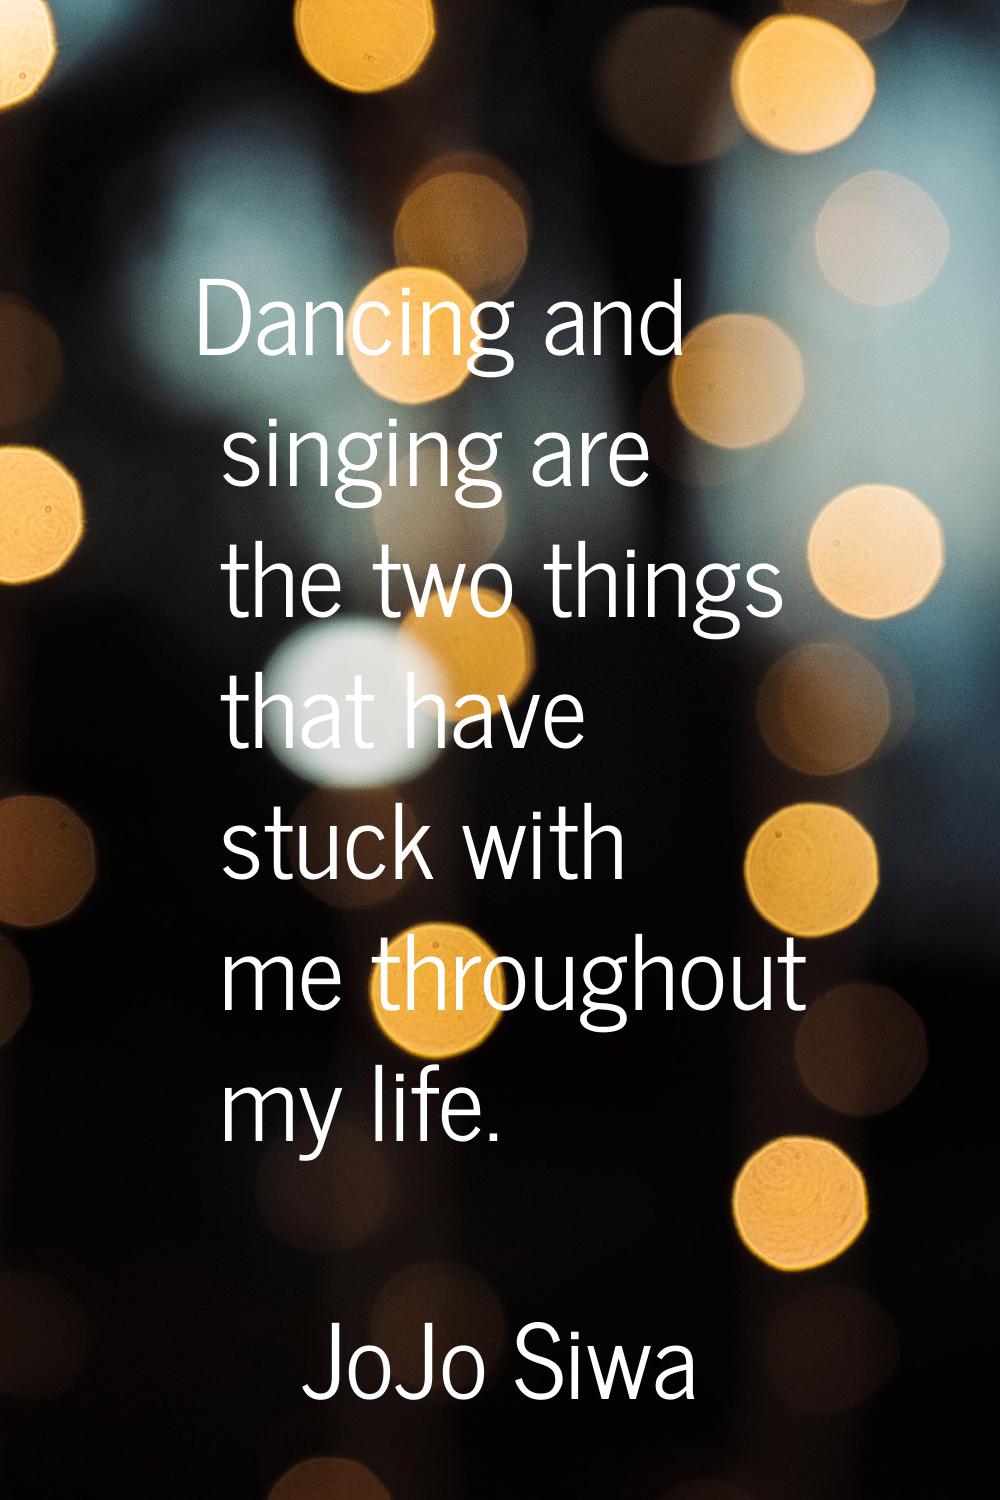 Dancing and singing are the two things that have stuck with me throughout my life.